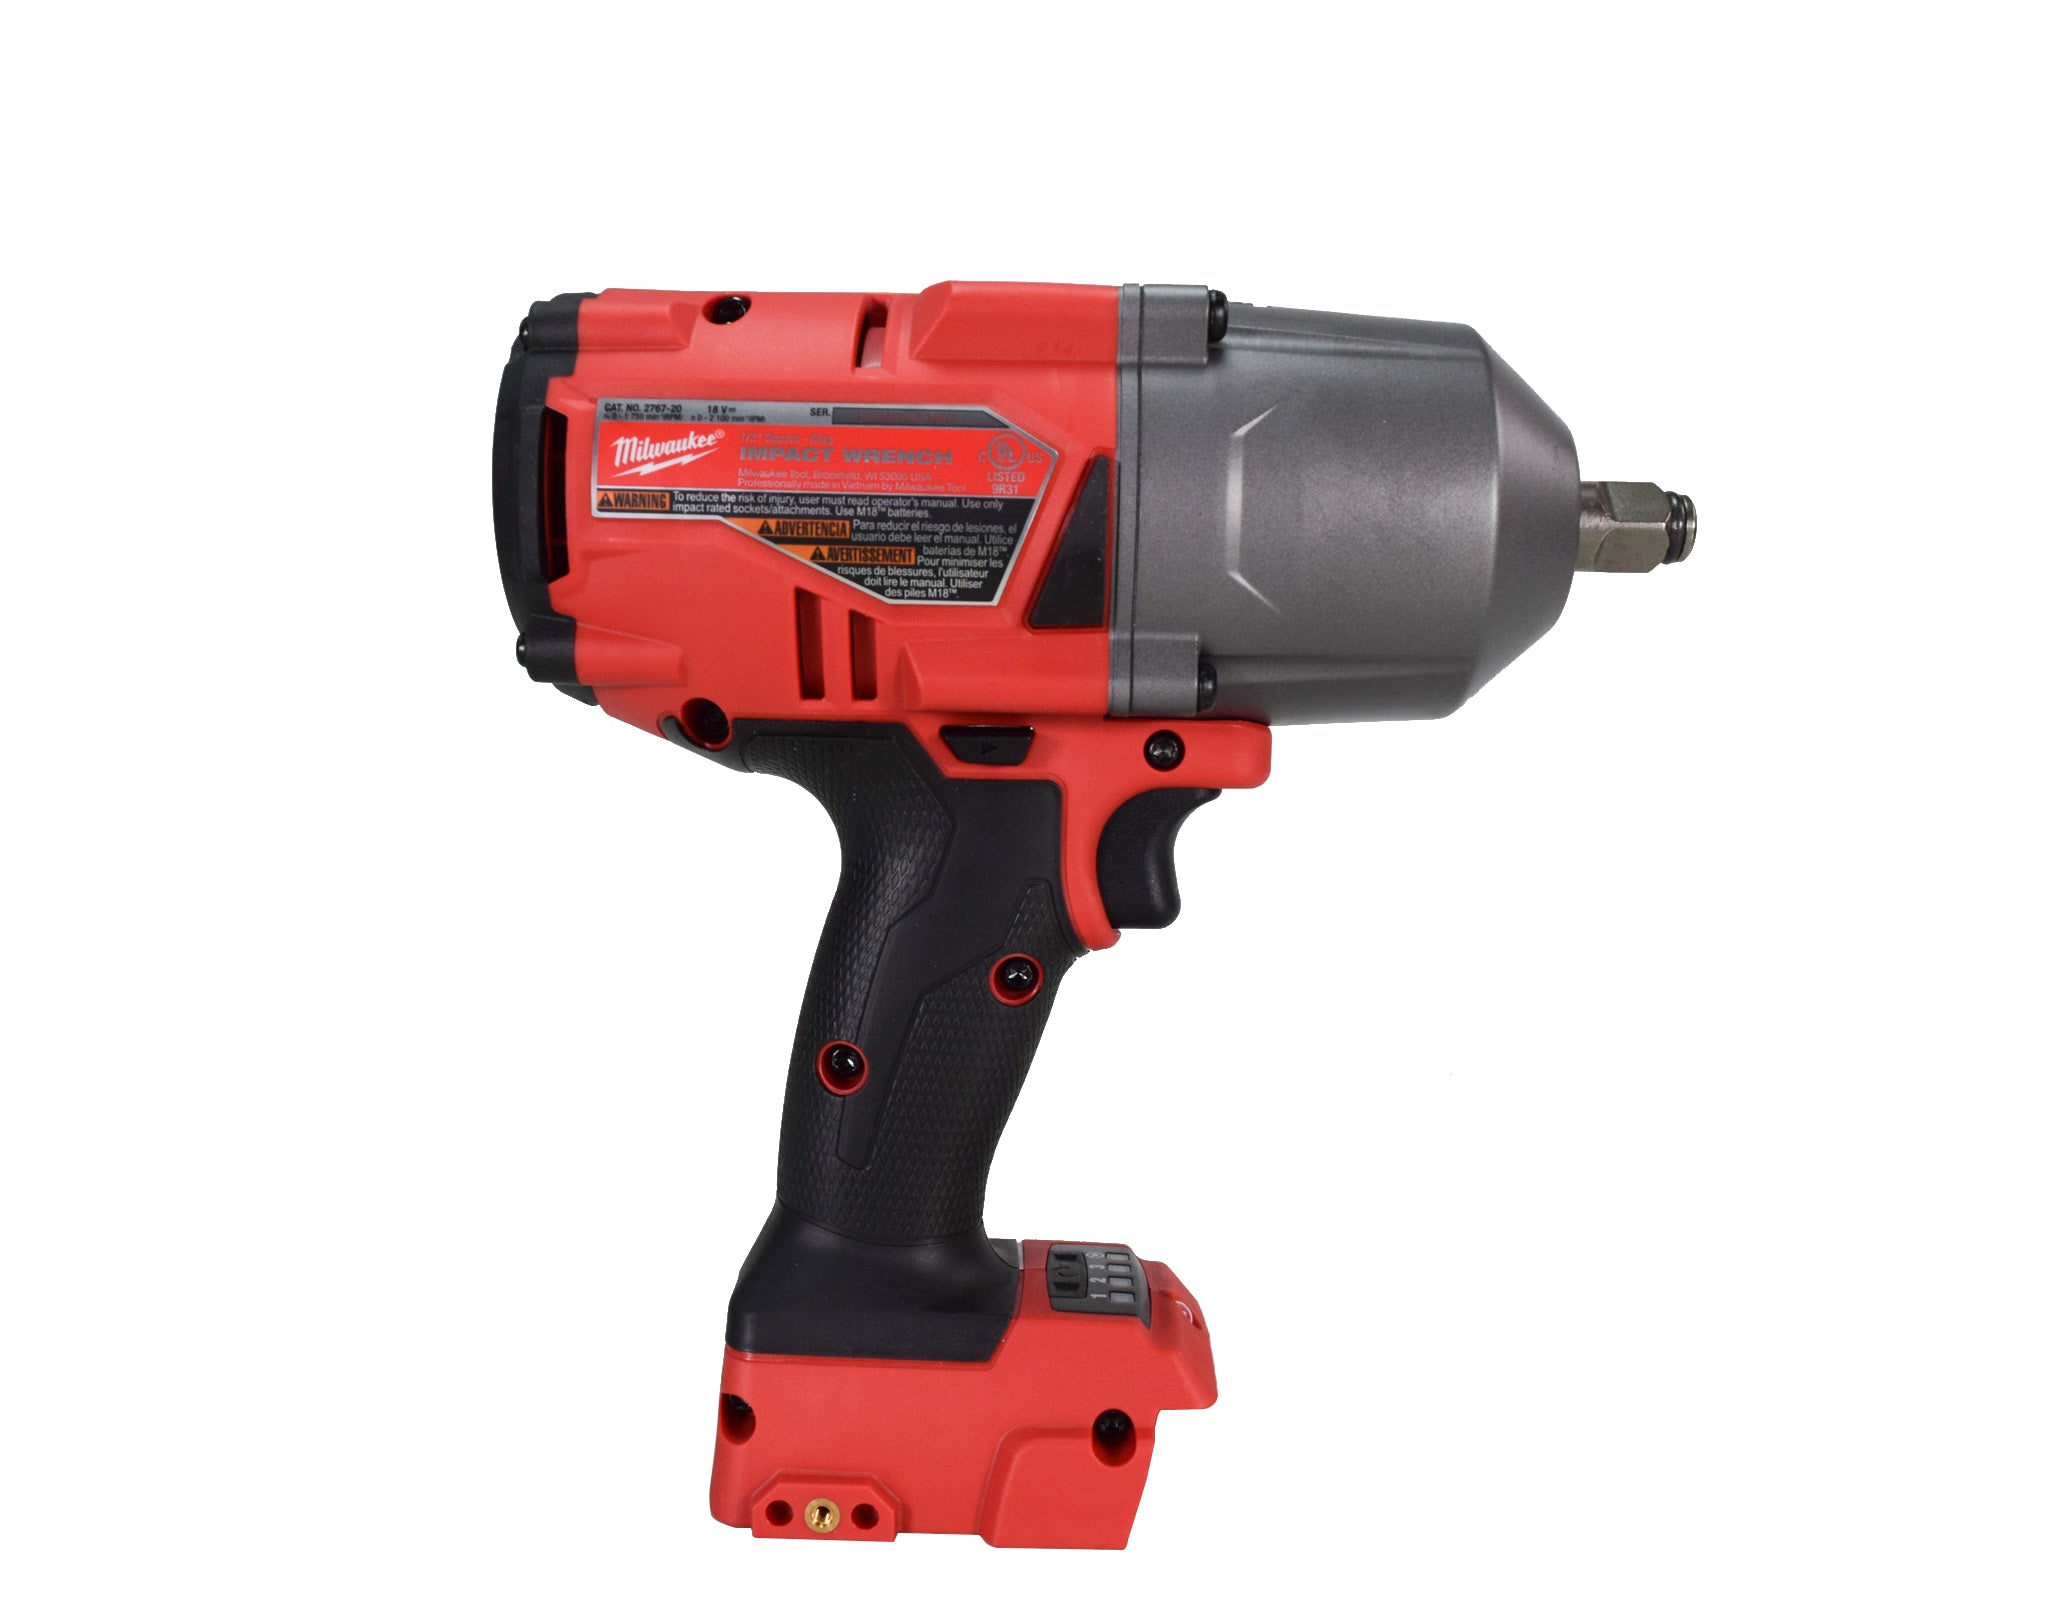 Milwaukee's 2767 Impact Wrench Problem has Been Resolved